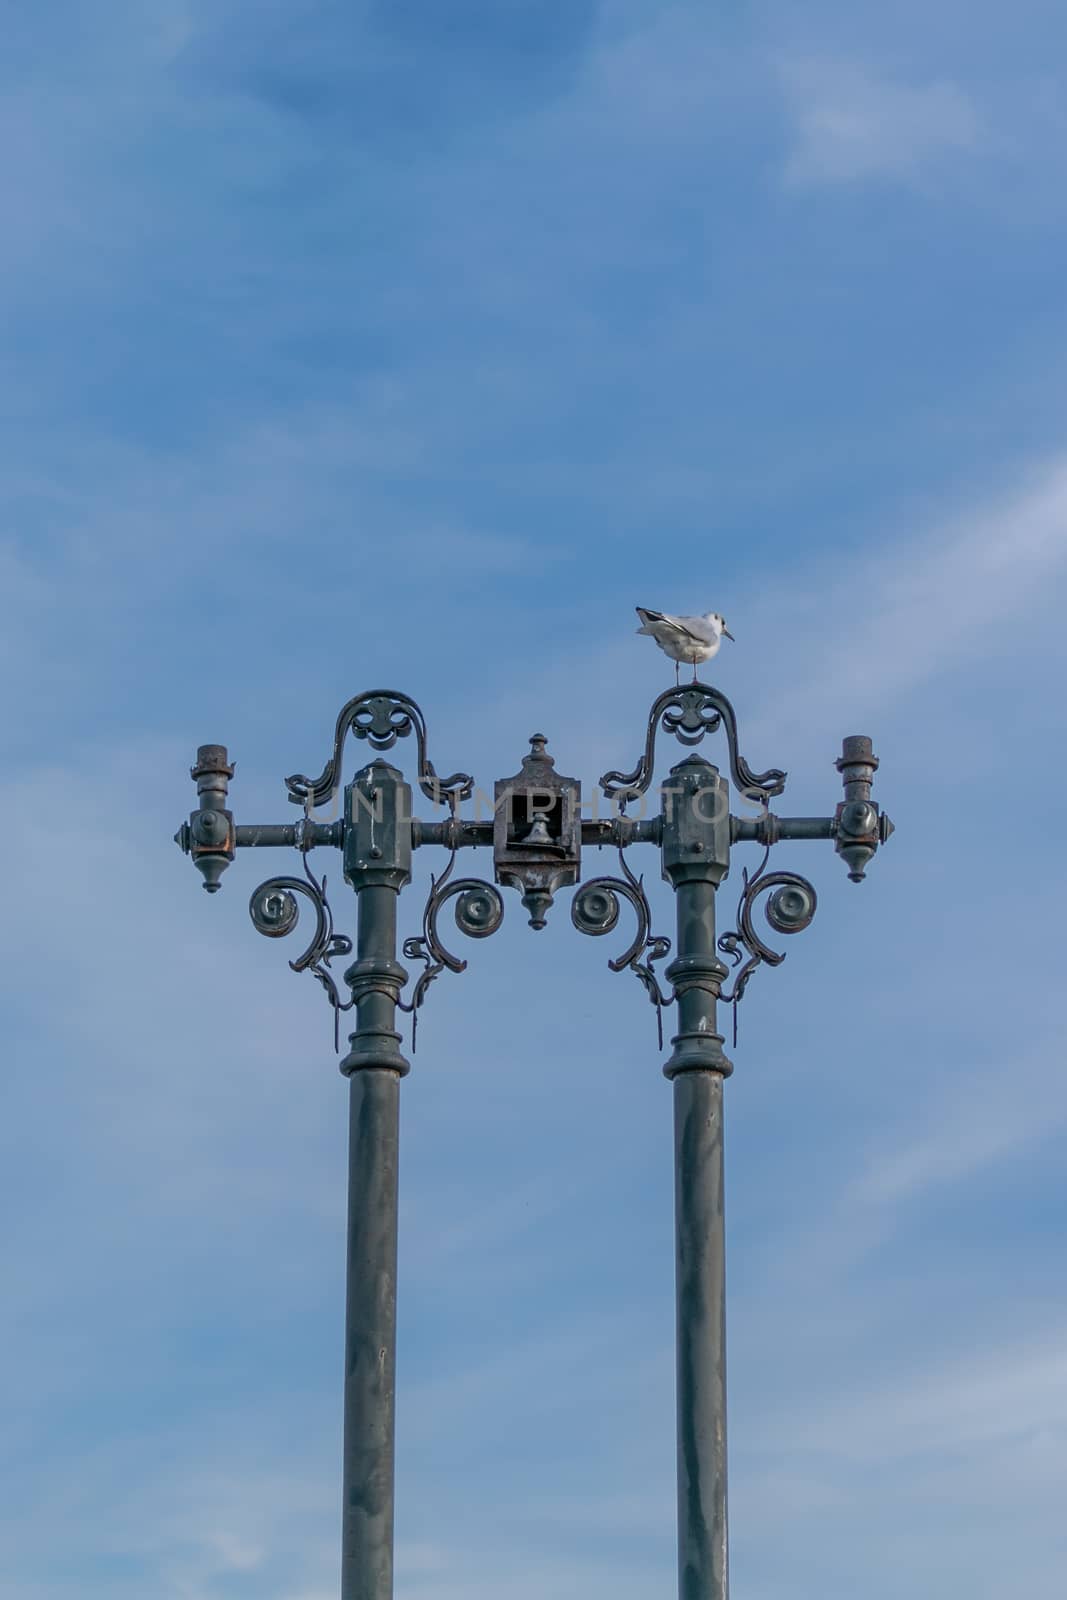 A seagull standing on an old lamp post with some interesting shapes and the sky in the background, Bucharest, Romania